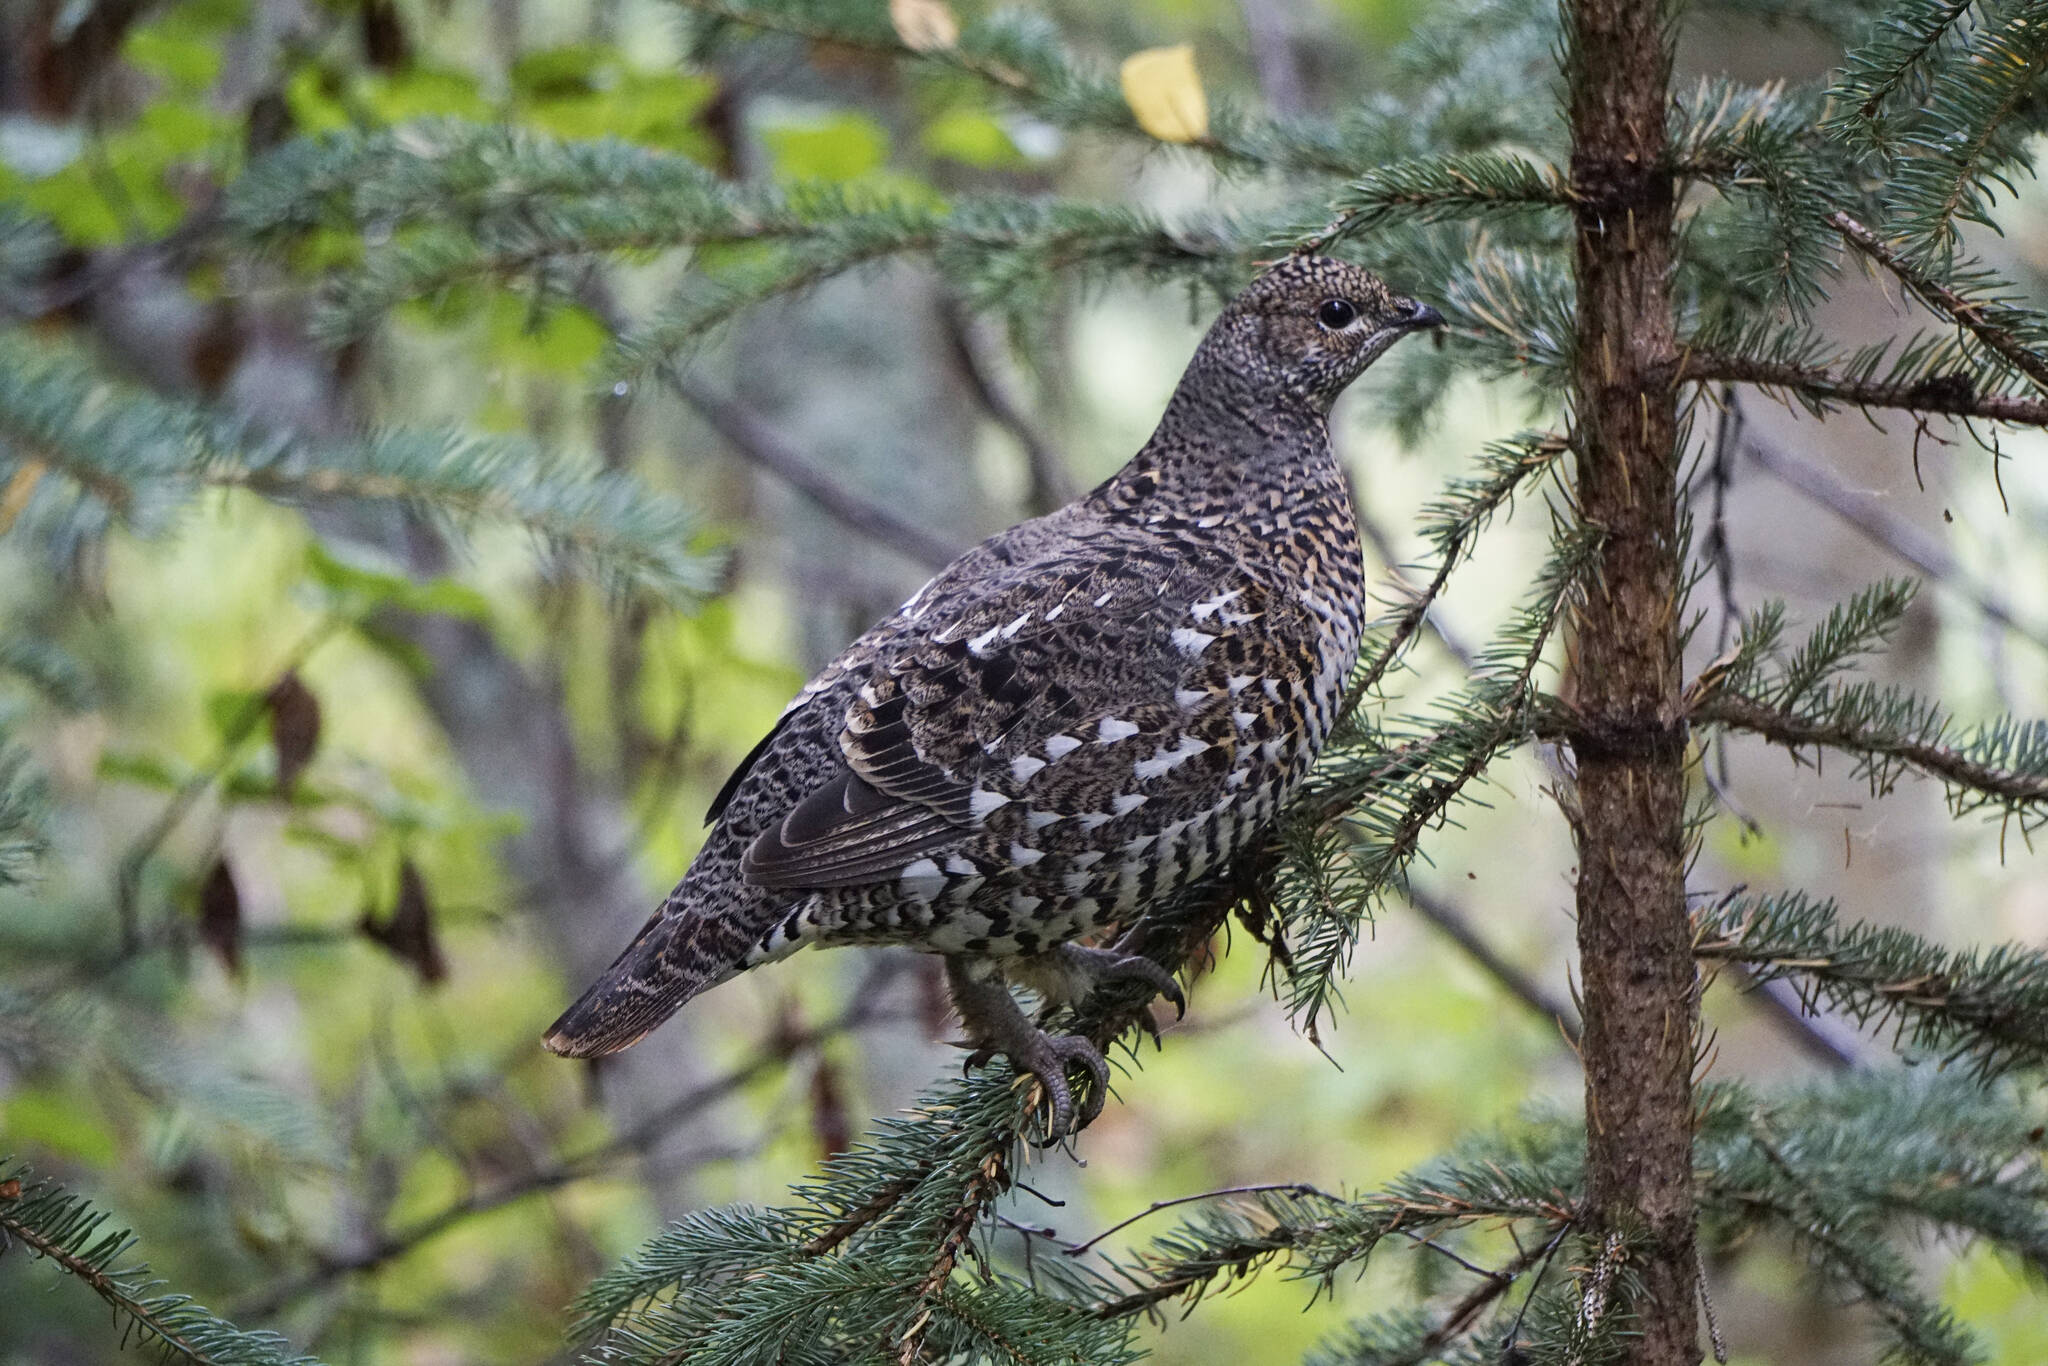 A spruce grouse sits in a tree on Friday, Sept. 10, 2021, at the Hidden Lake Campground in the Kenai National Wildlife Refuge near Sterling, Alaska. (Photo by Michael Armstrong/Homer News)